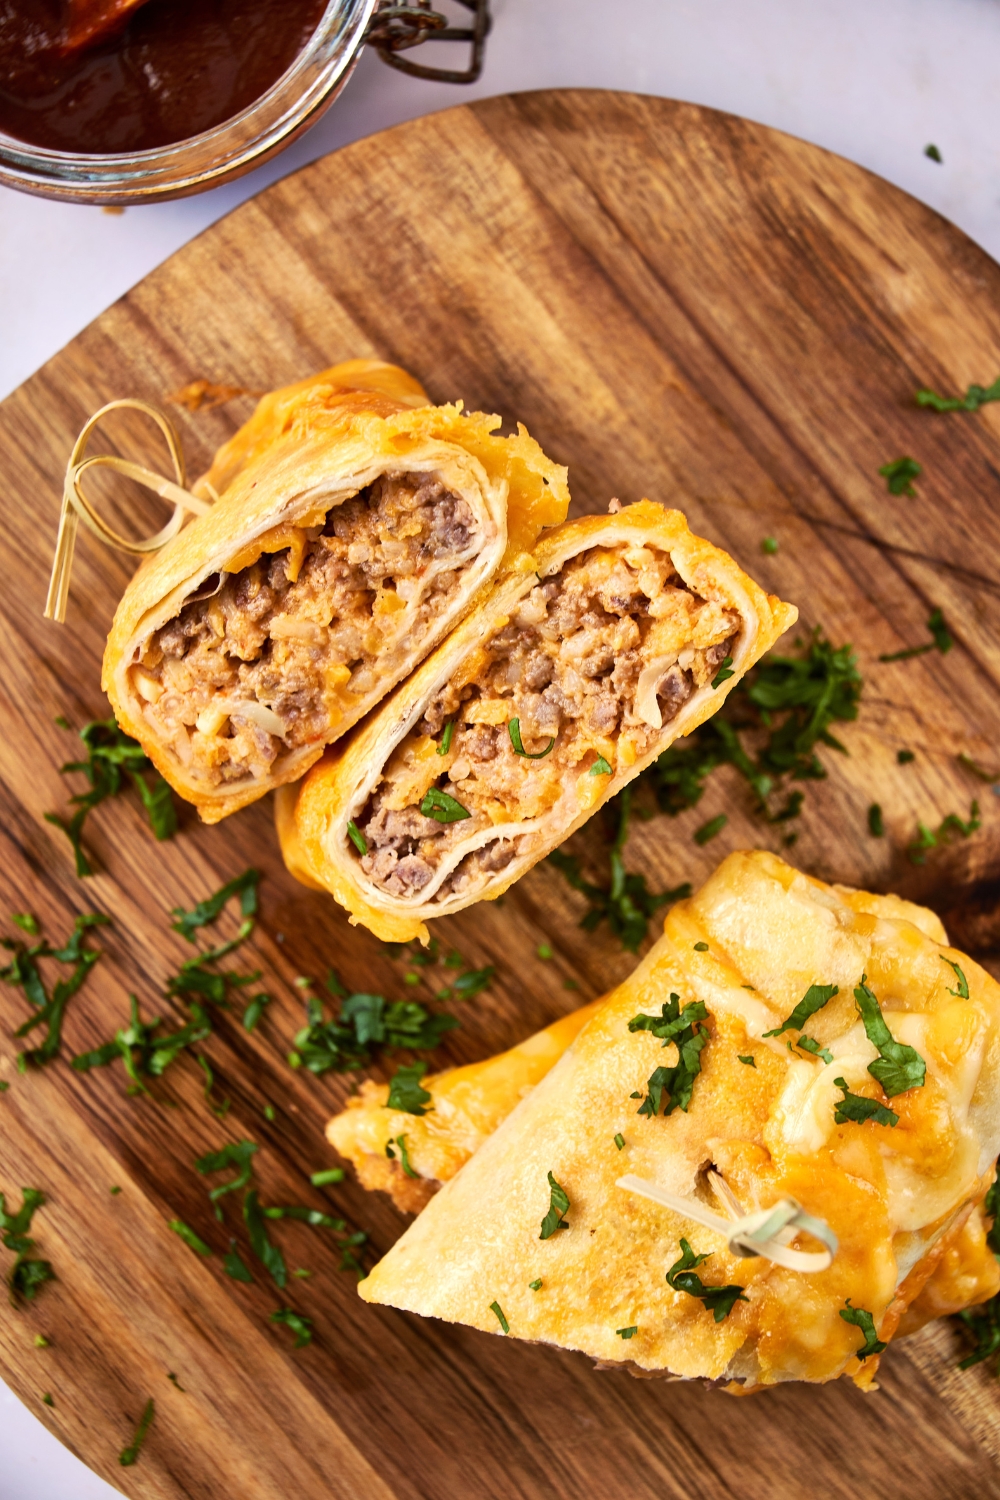 Two grilled cheese burritos sit on a wooden serving board. They have been garnished with fresh herbs.